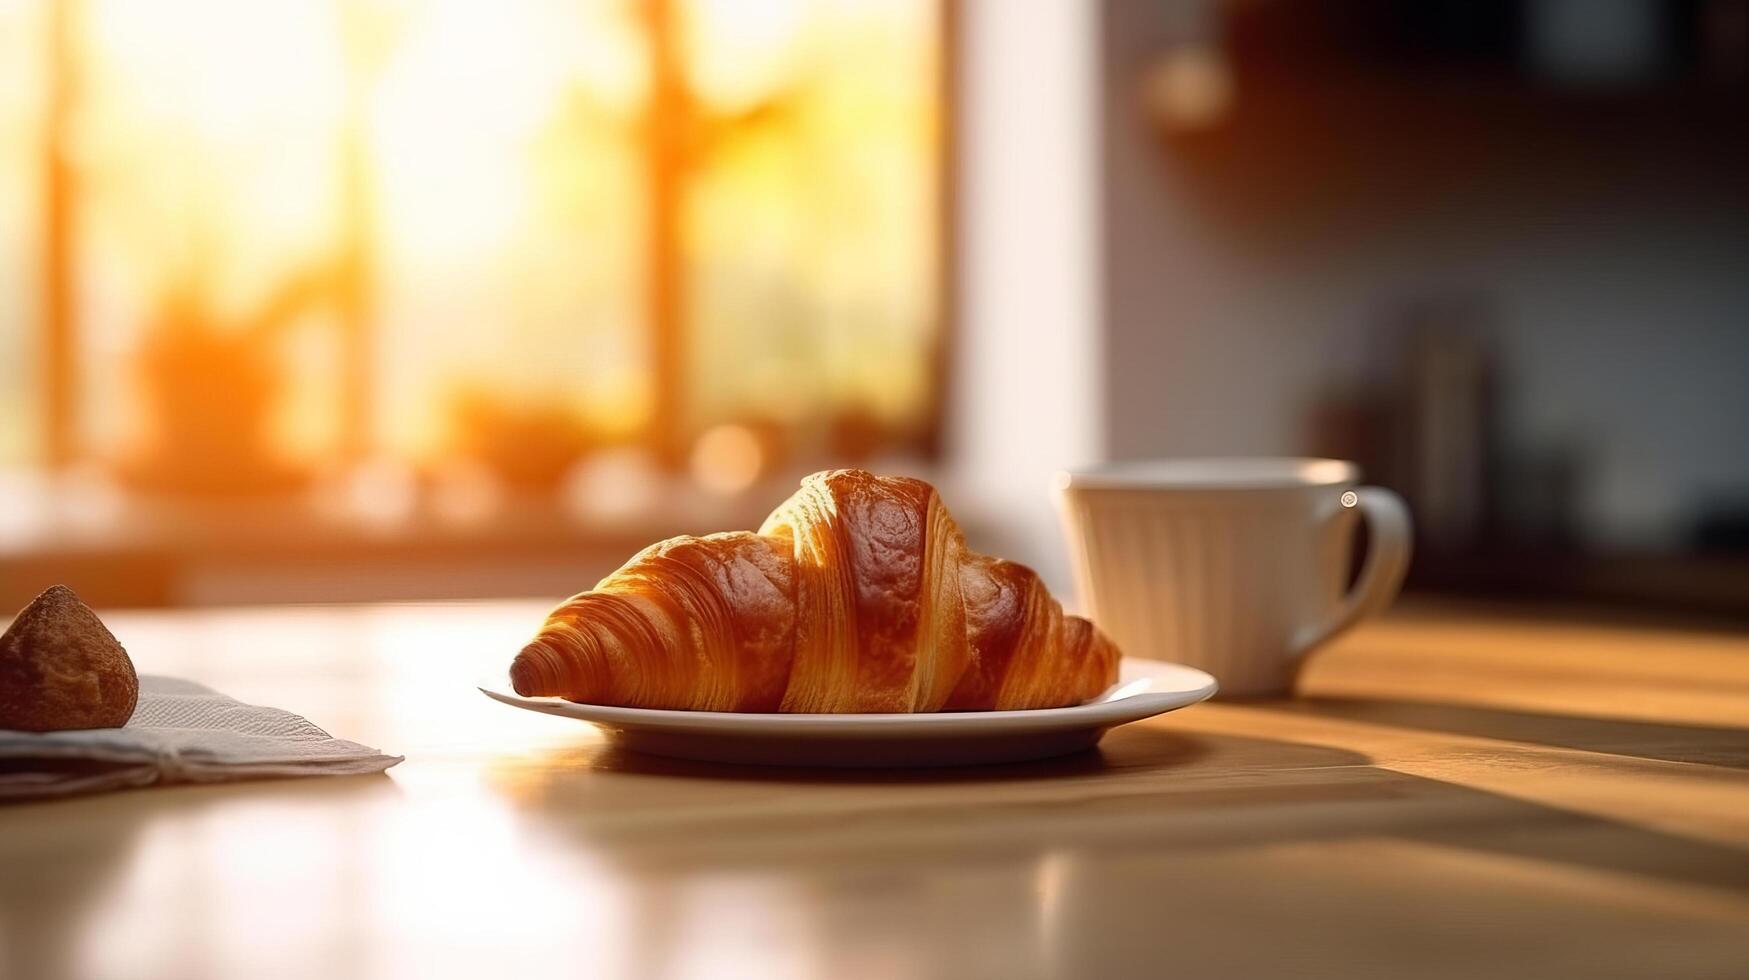 Morning coffee with croissant. Illustration photo